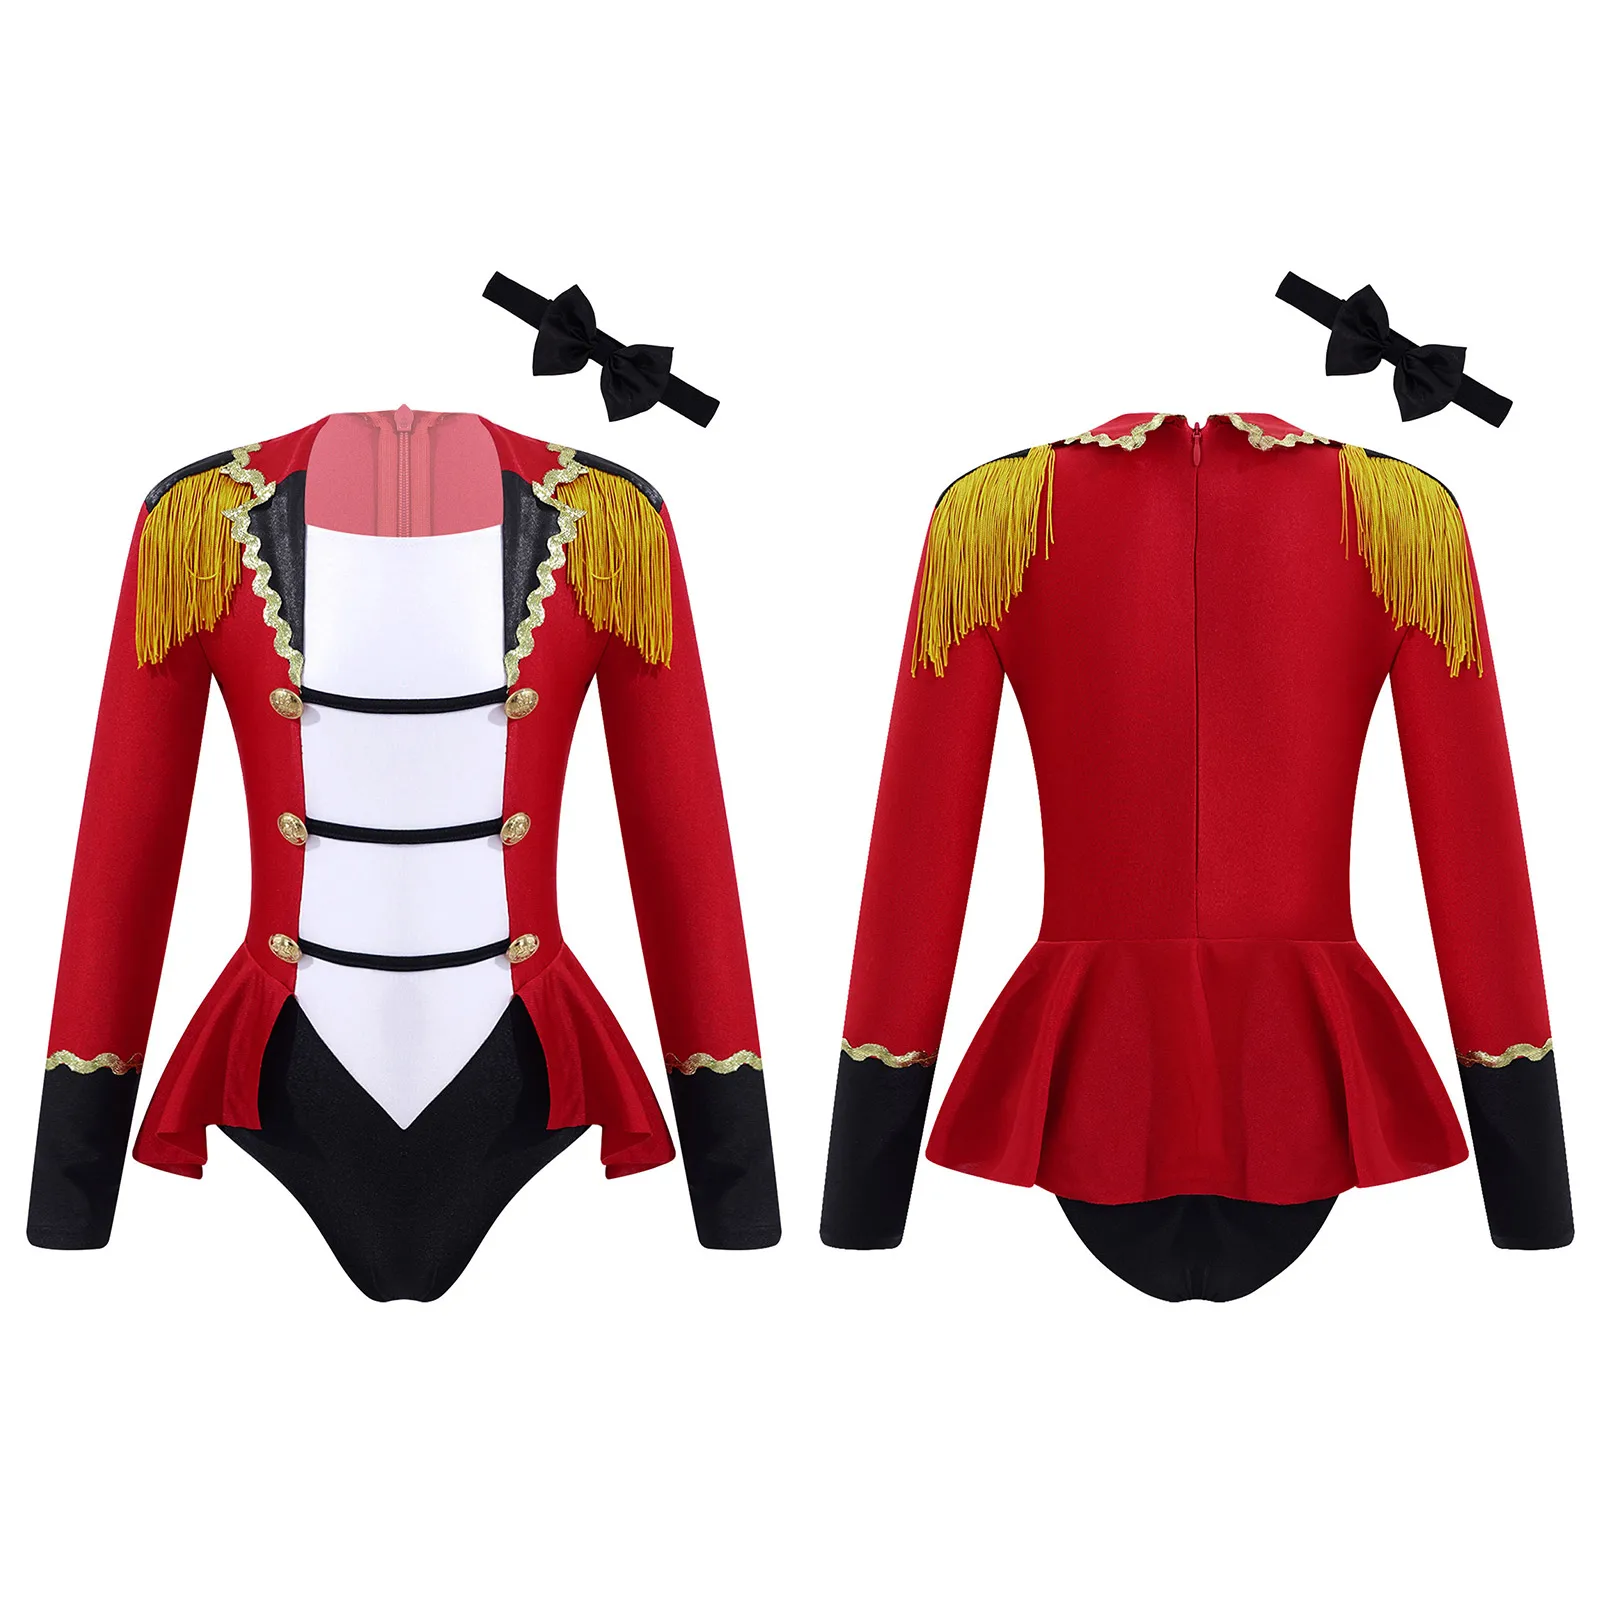 

Kids Girls Halloween Circus Ringmaster Cosplay Costume Outift Long Sleeves Jumpsuit+Tie Outfit for Fancy Carnival Party Dress Up